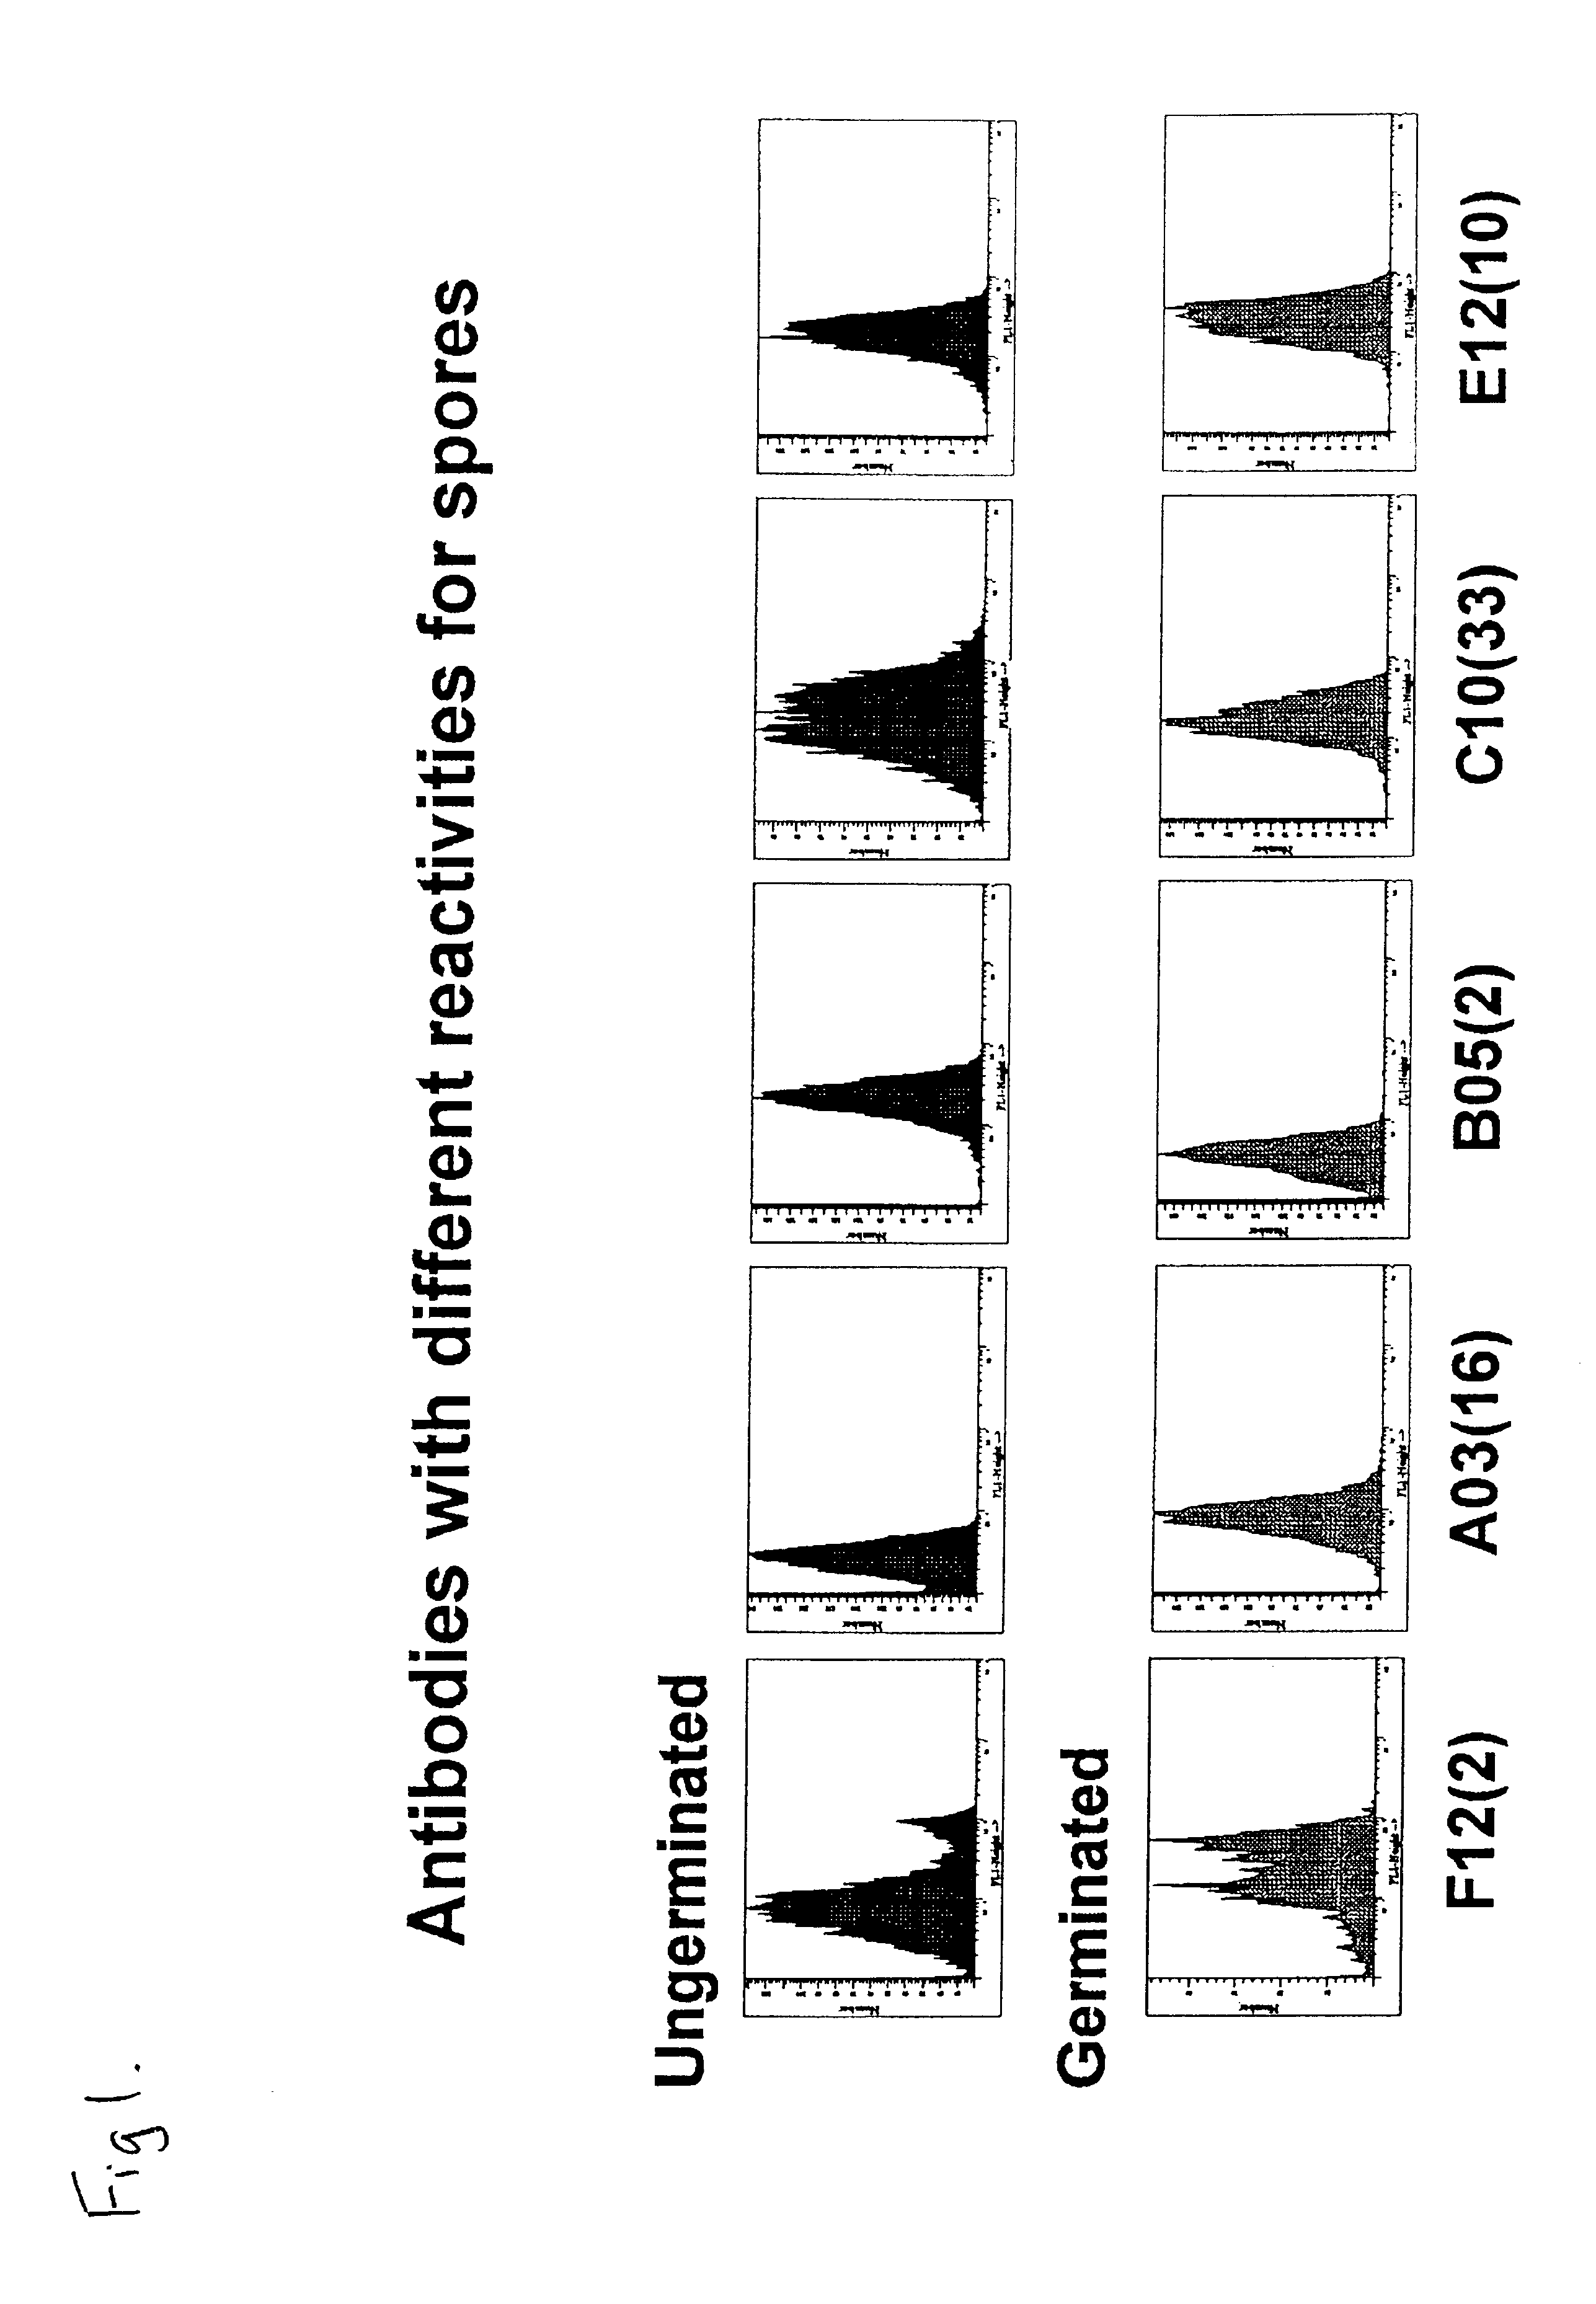 Monoclonal antibodies specific for anthrax and peptides derived from the antibodies thereof